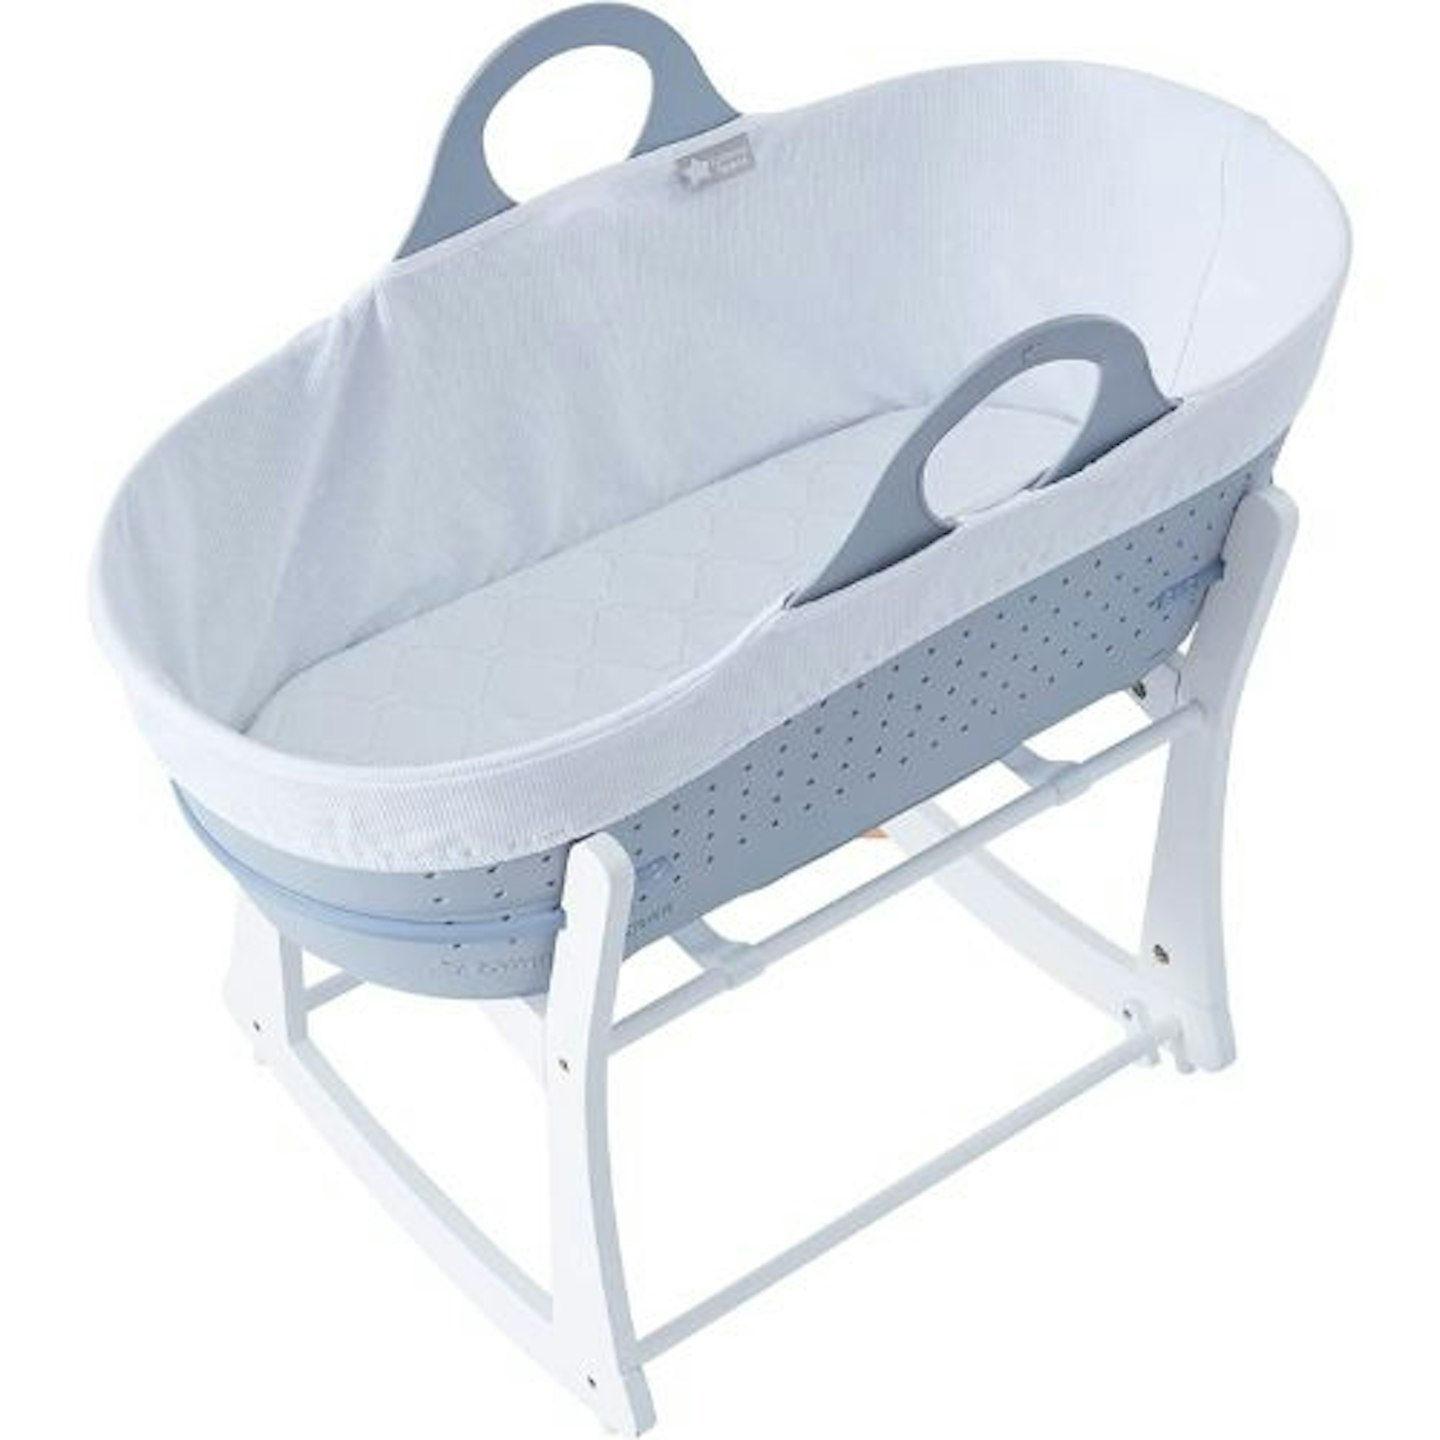 Best Moses Baby Basket & Portable Baby Beds For Newborn/Infant